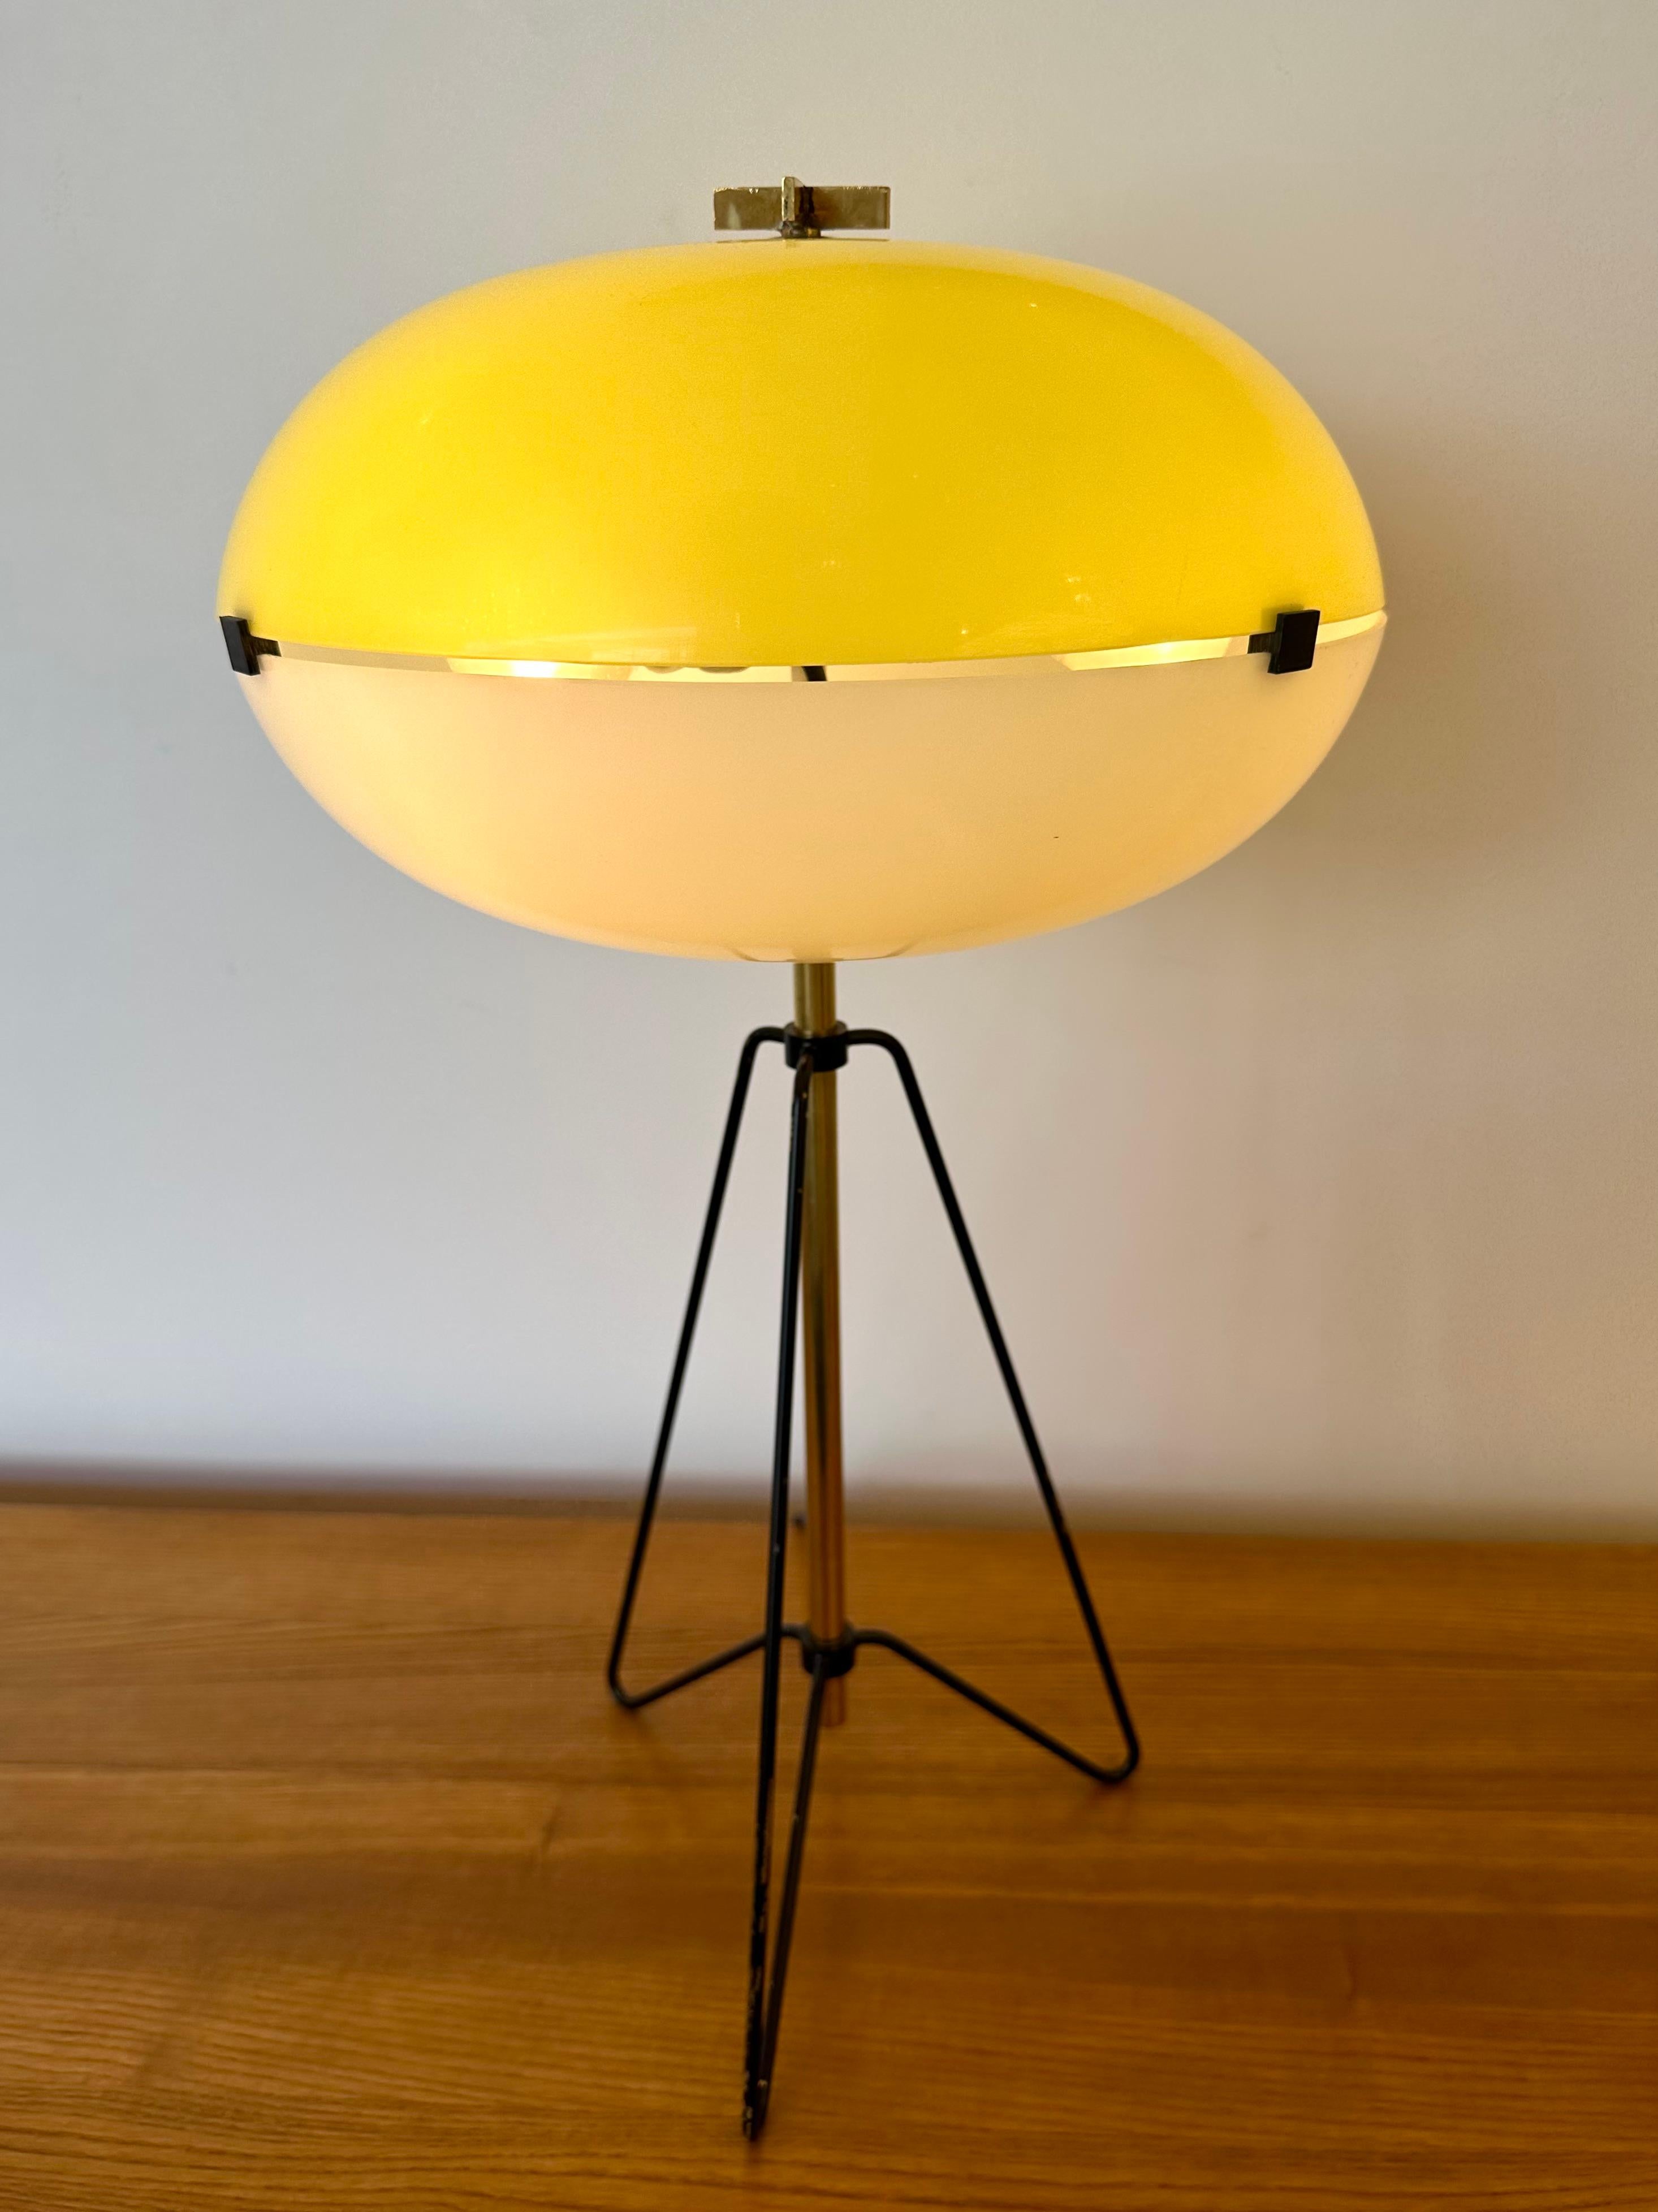 Midcentury Table Lamp Methacrylate and Brass by Stilnovo, Italy, 1960s For Sale 3